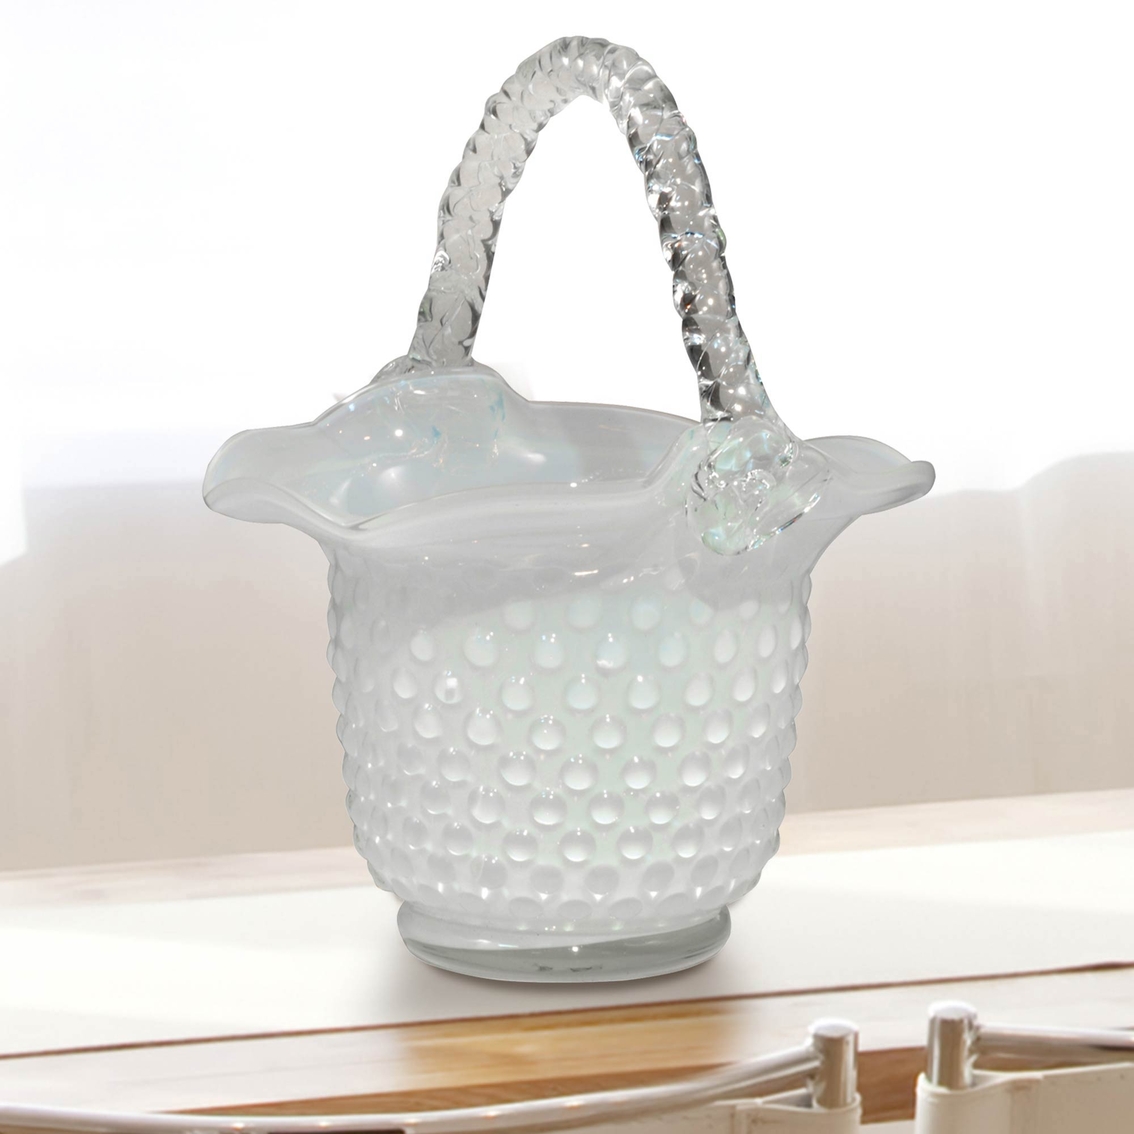 Dale Tiffany Clear Art Glass Basket - Image 2 of 2